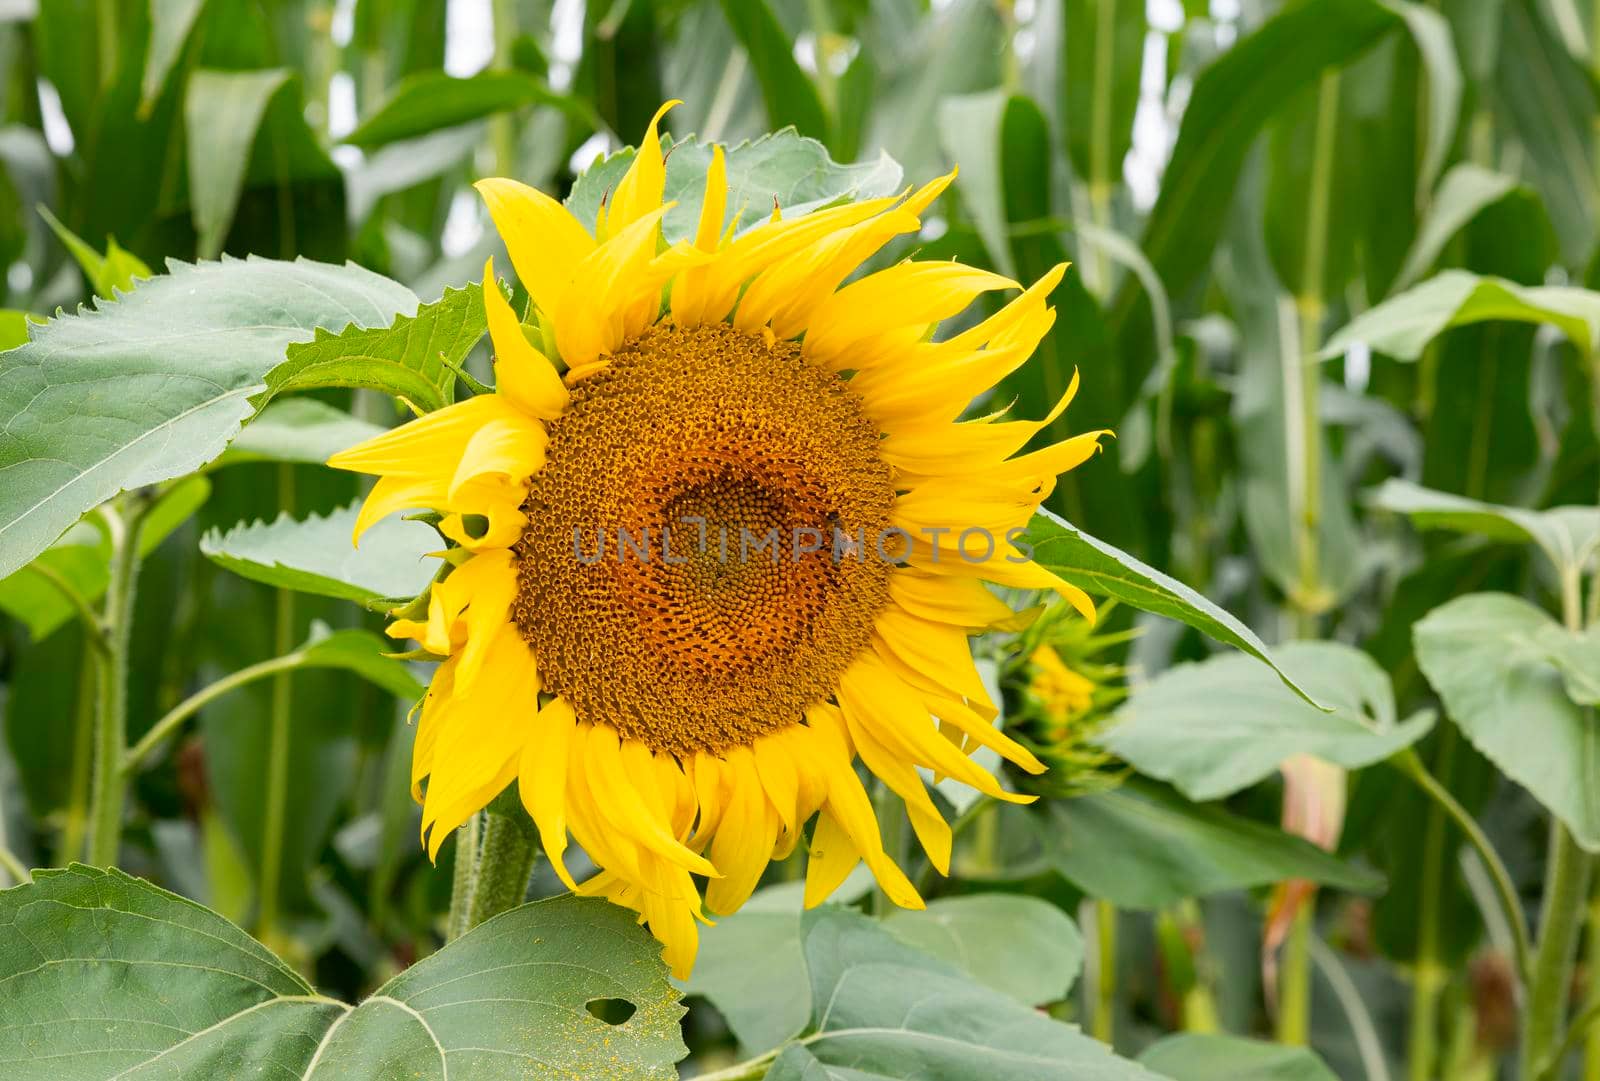 field with sunflowers and a bee on one of them